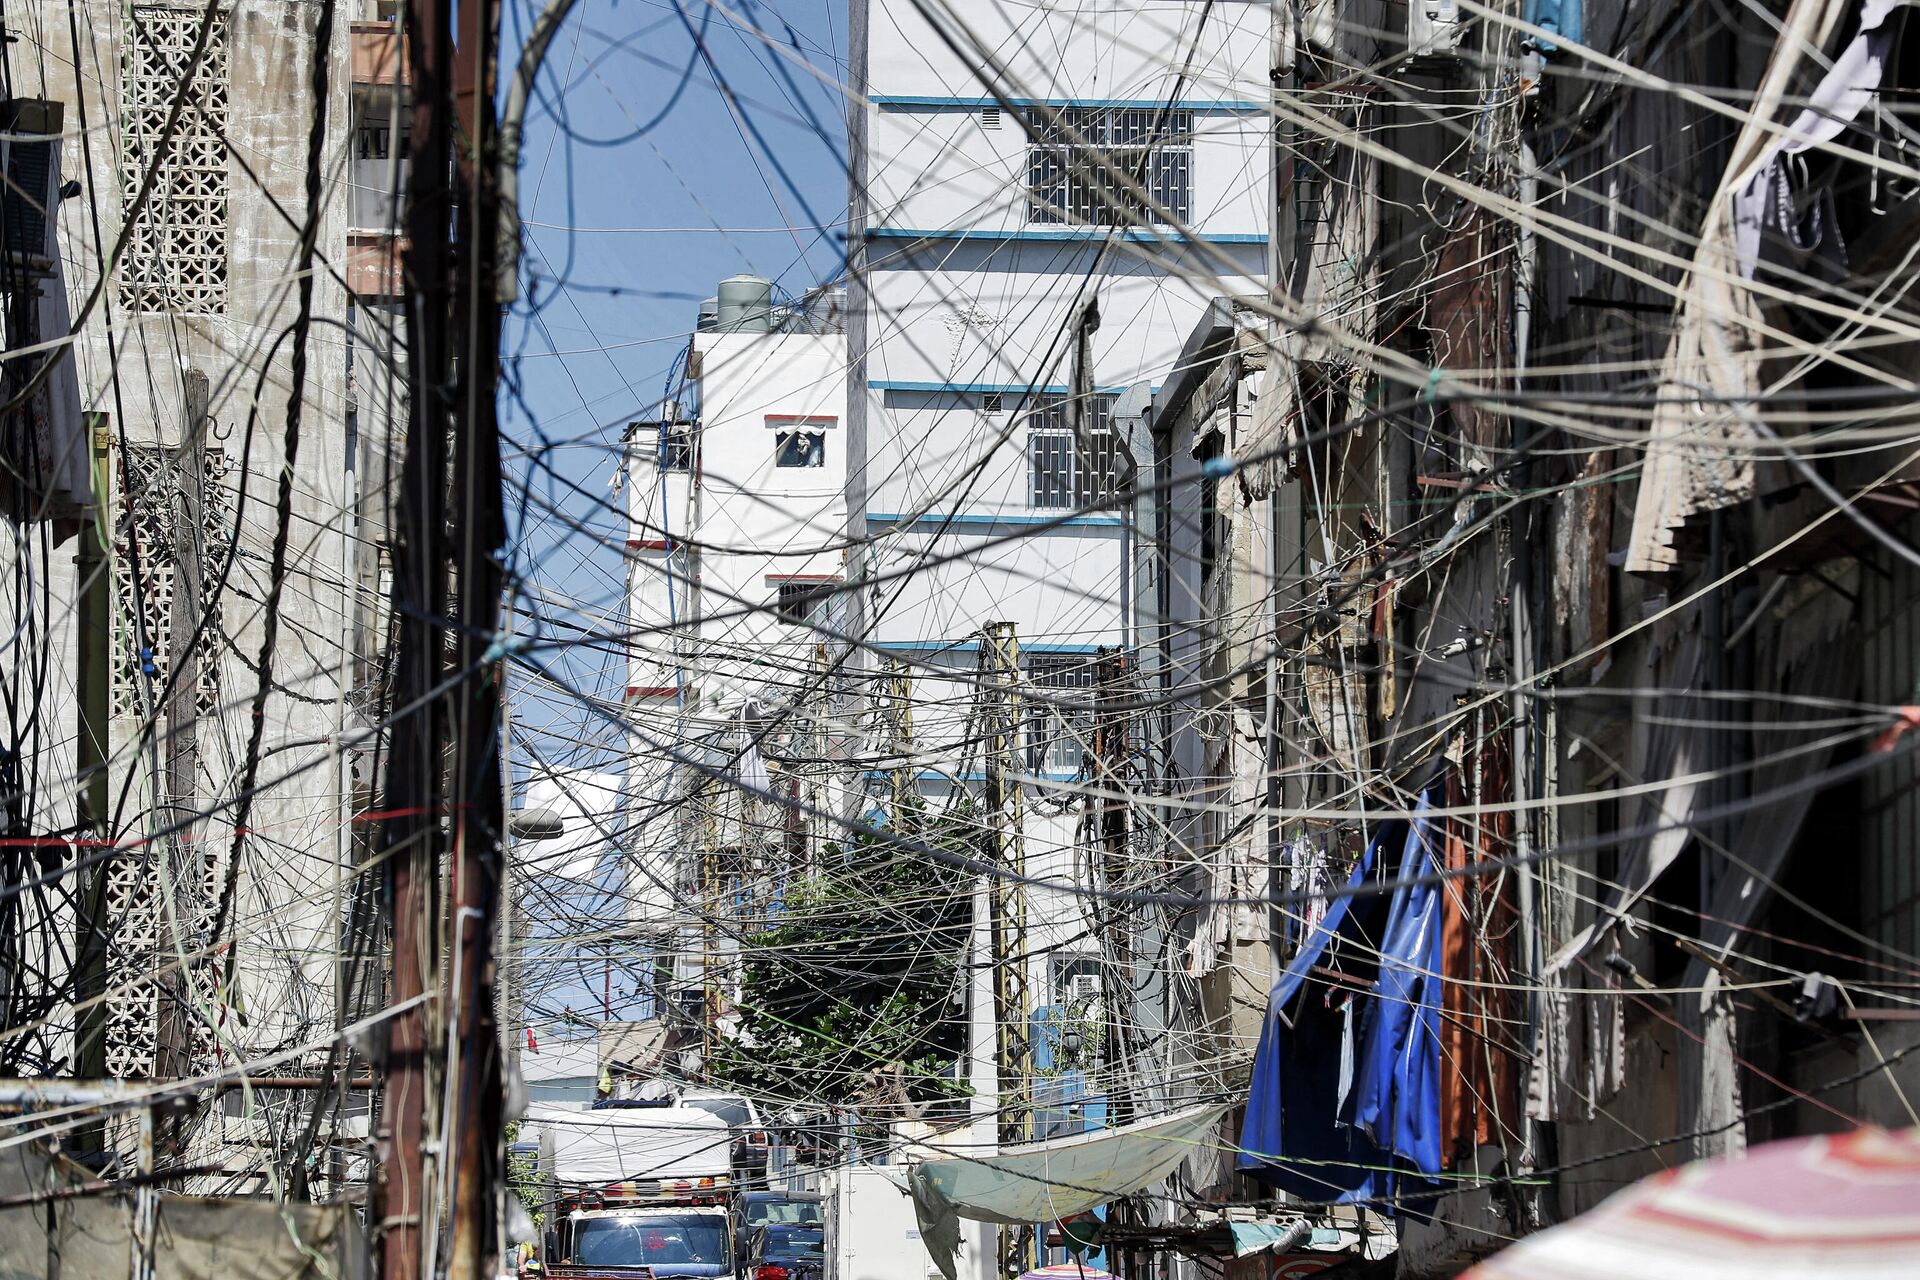 This file photo taken on June 23, 2021, shows a view of a mesh of raised electricity lines along a street in a suburb of Lebanon's capital Beirut. - Lebanon was plunged into a total blackout today after two main power stations went offline because they ran out of fuel, the state electricity corporation said. - Sputnik International, 1920, 10.10.2021